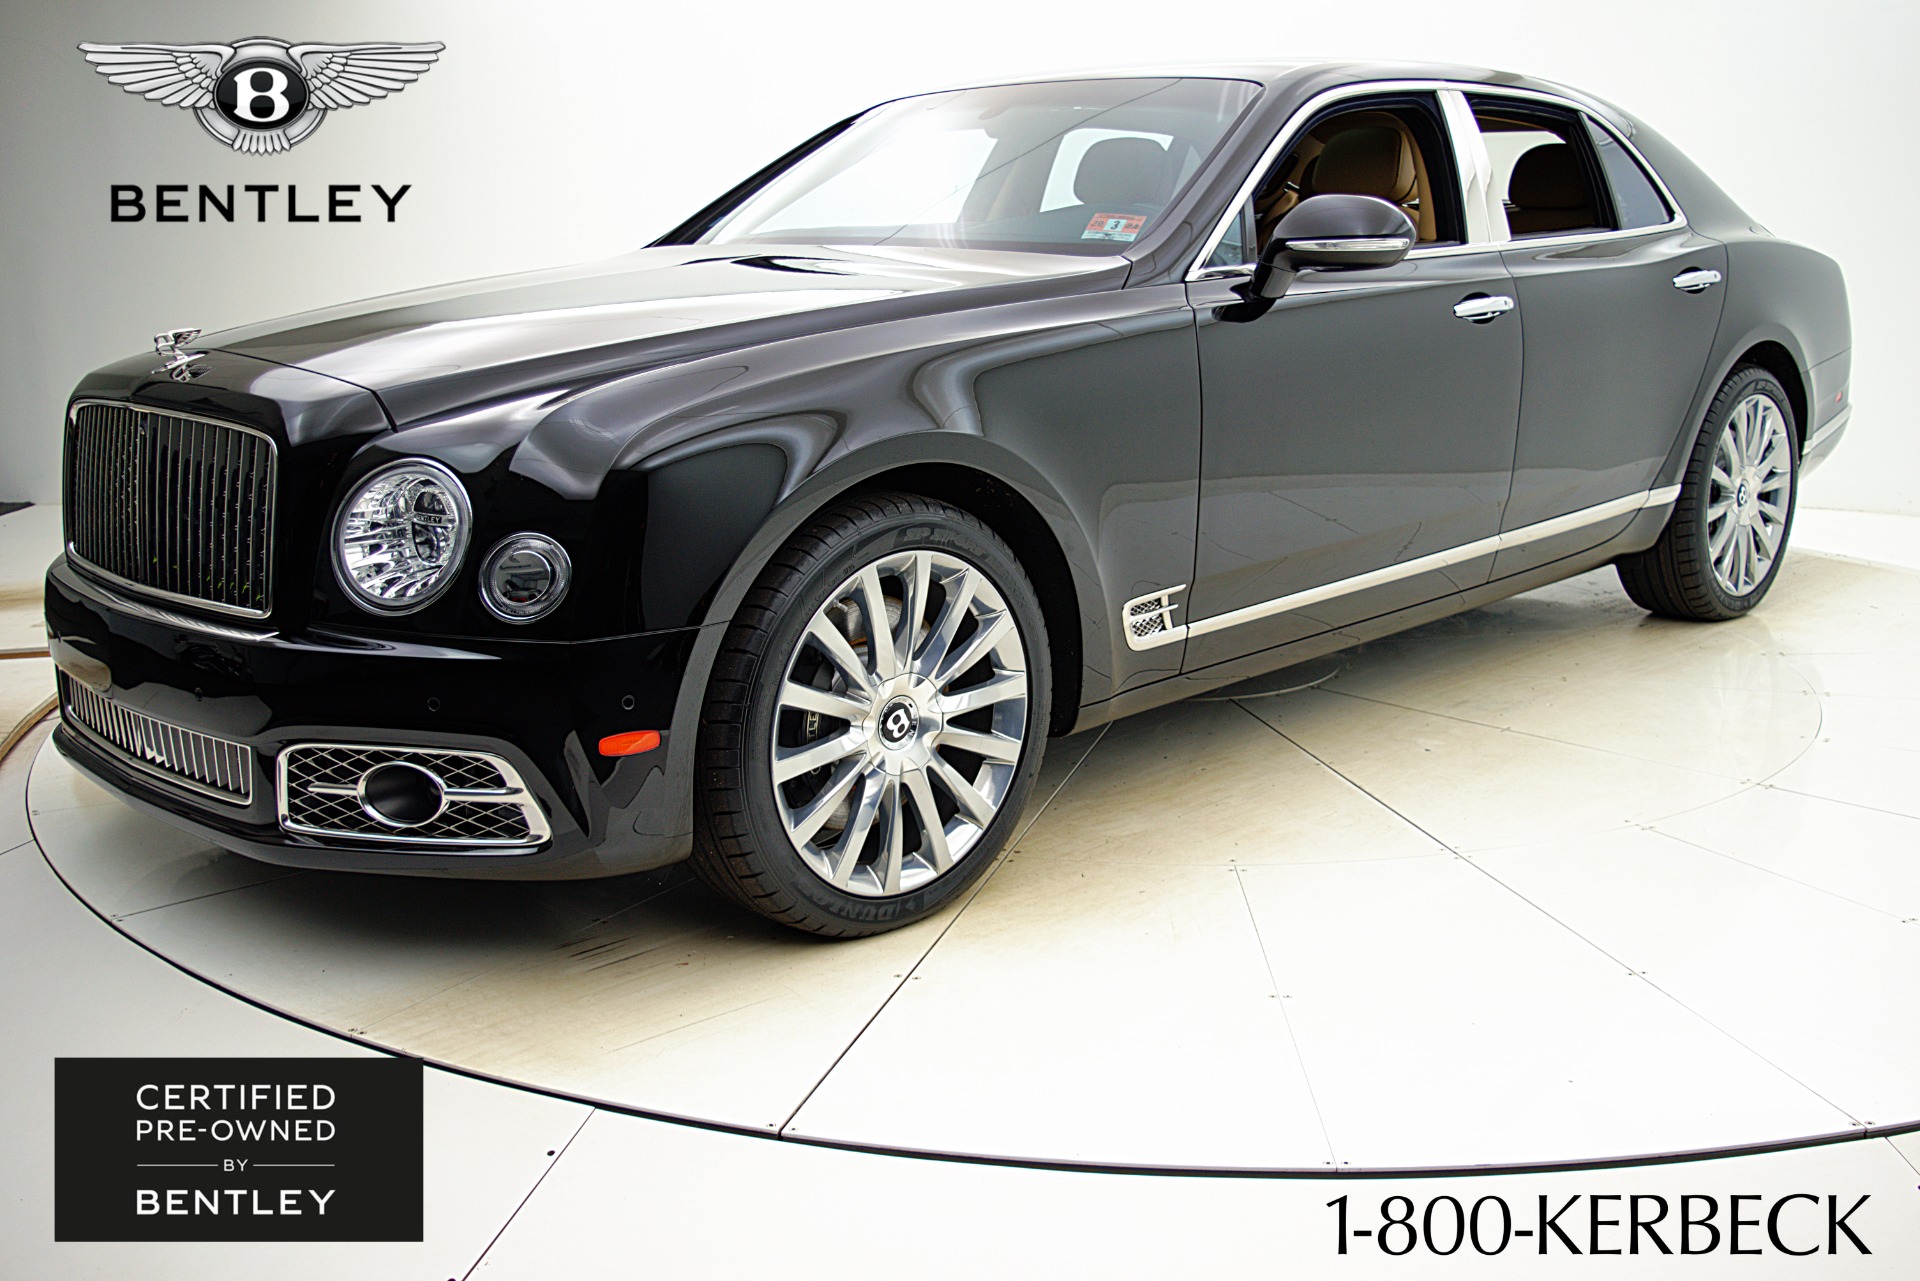 Used 2017 Bentley Mulsanne for sale $165,000 at F.C. Kerbeck Aston Martin in Palmyra NJ 08065 2